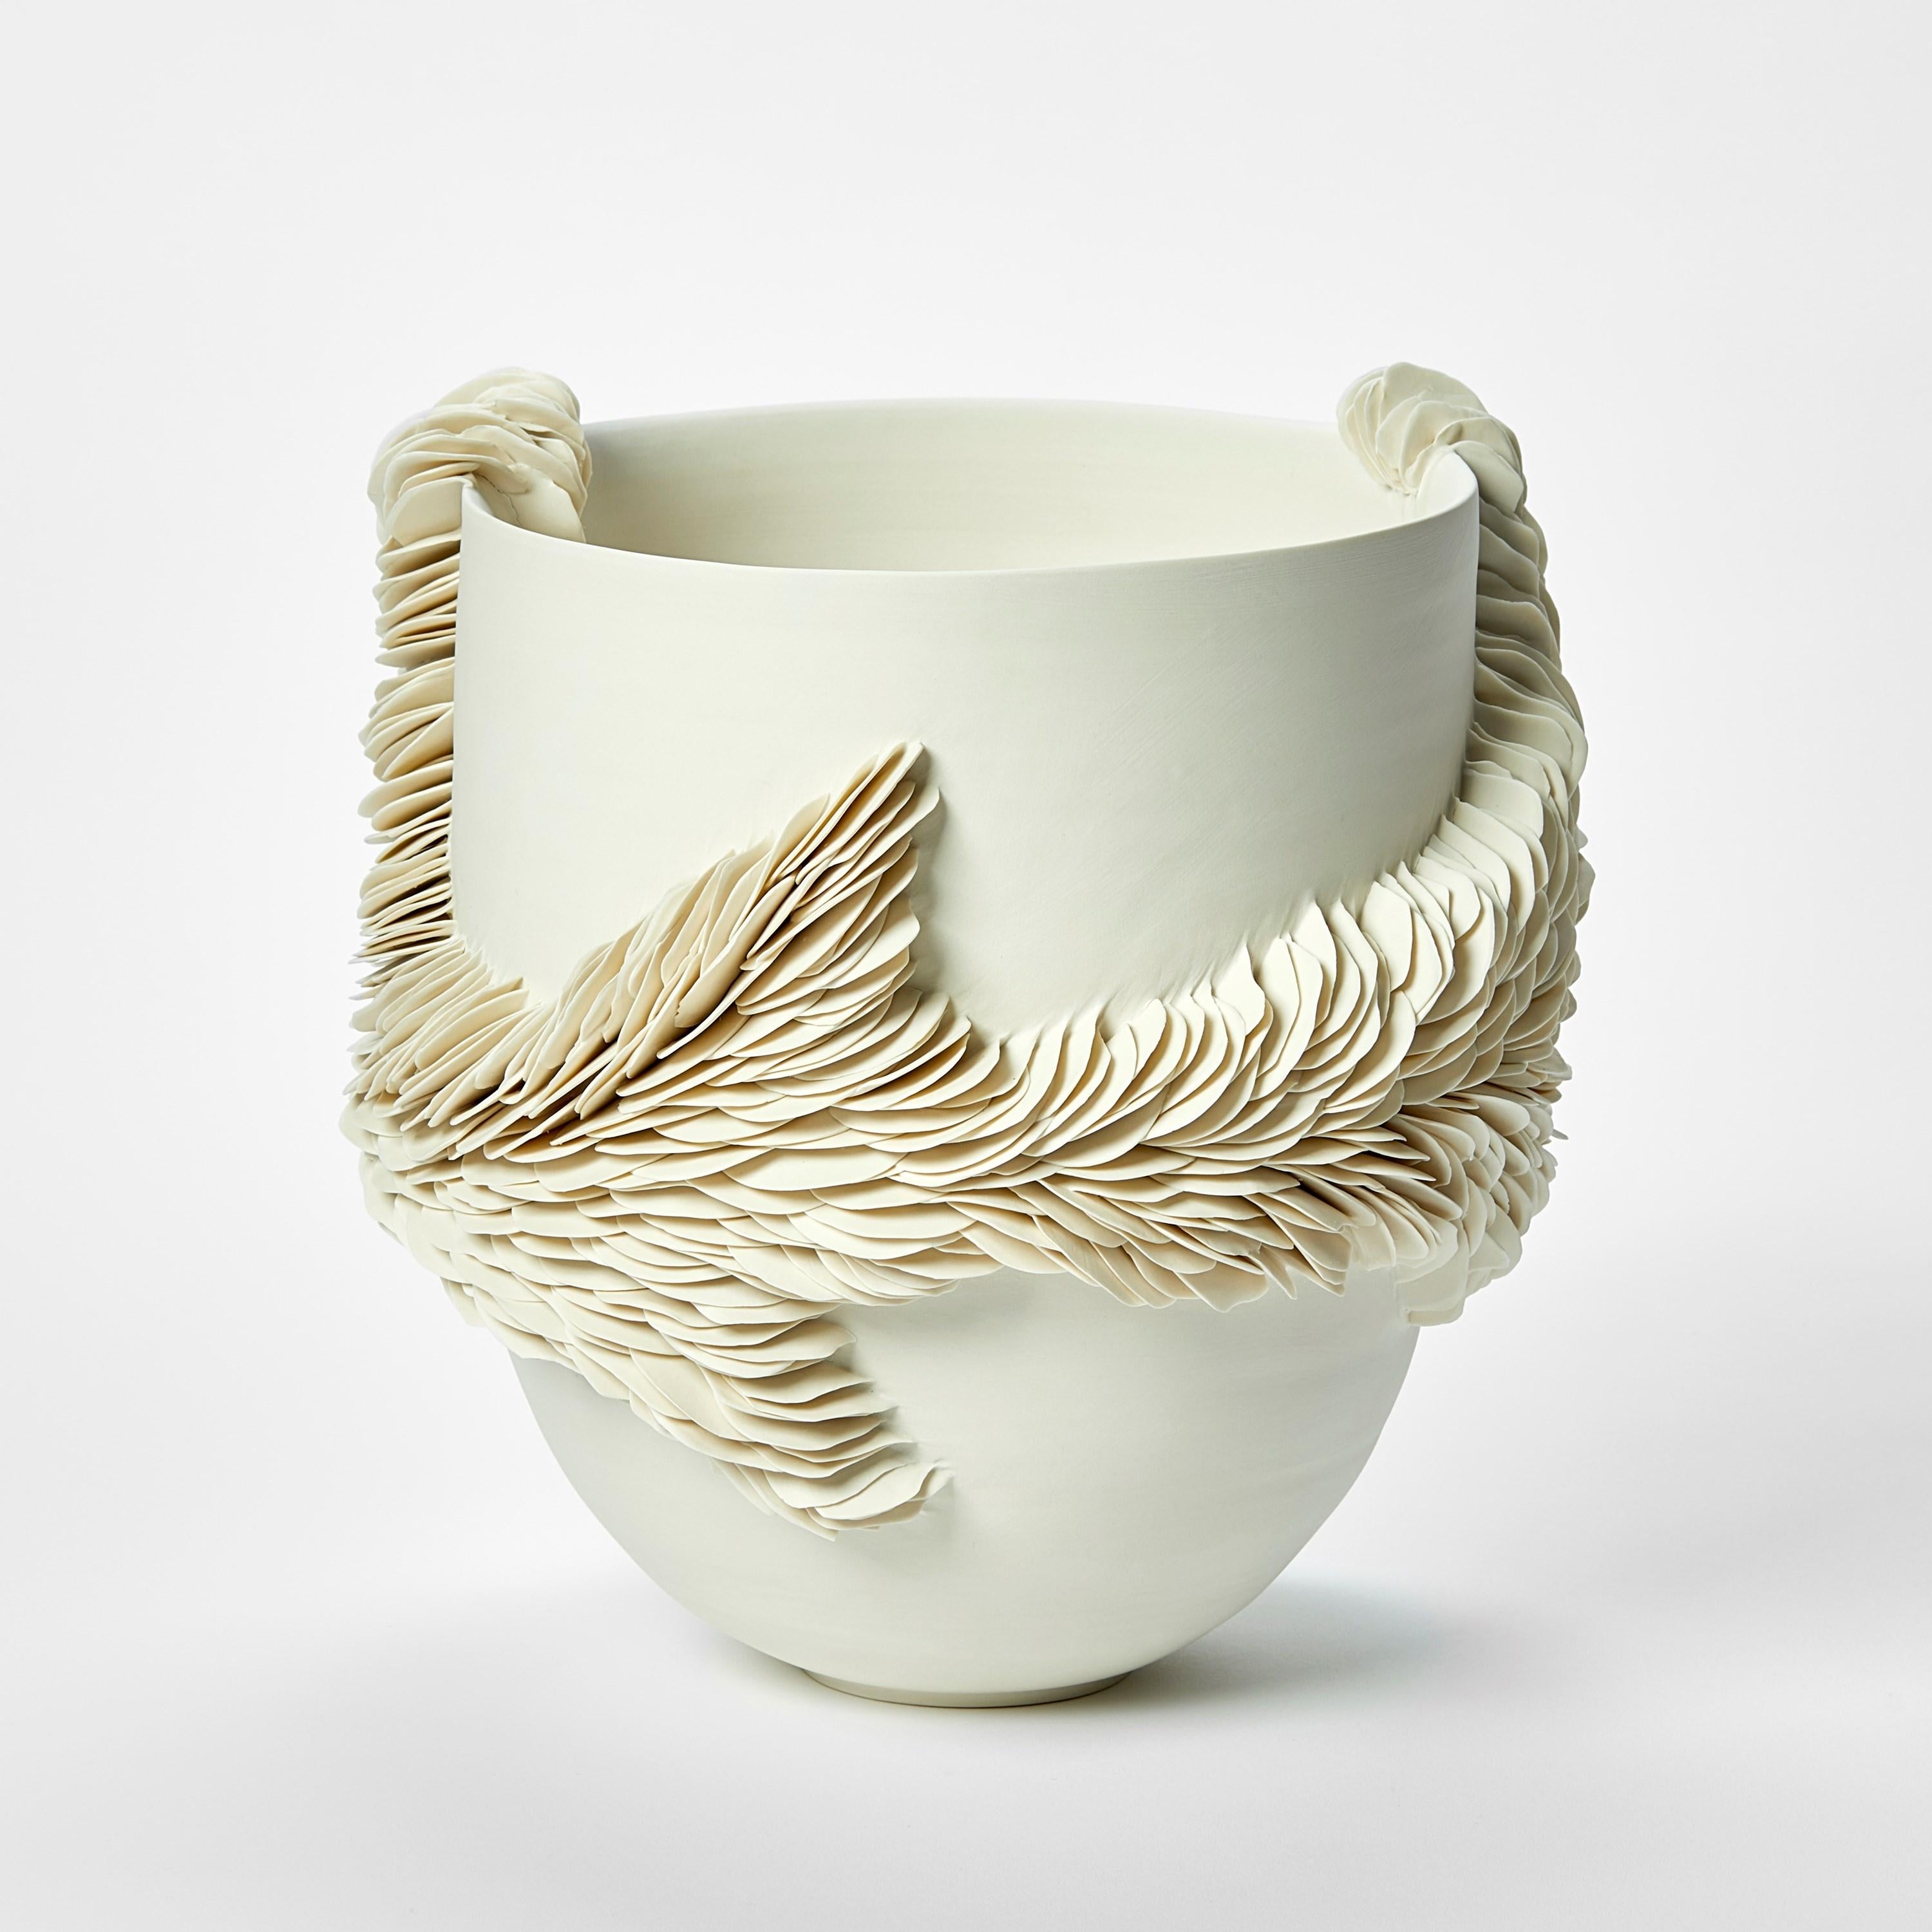 'White Tall Wrapping Bowl I' is a unique porcelain sculpture by the British artist, Olivia Walker.

Walker works in porcelain to create pieces that explore ideas of growth and decay through the construction and layering of complex surfaces.

All of